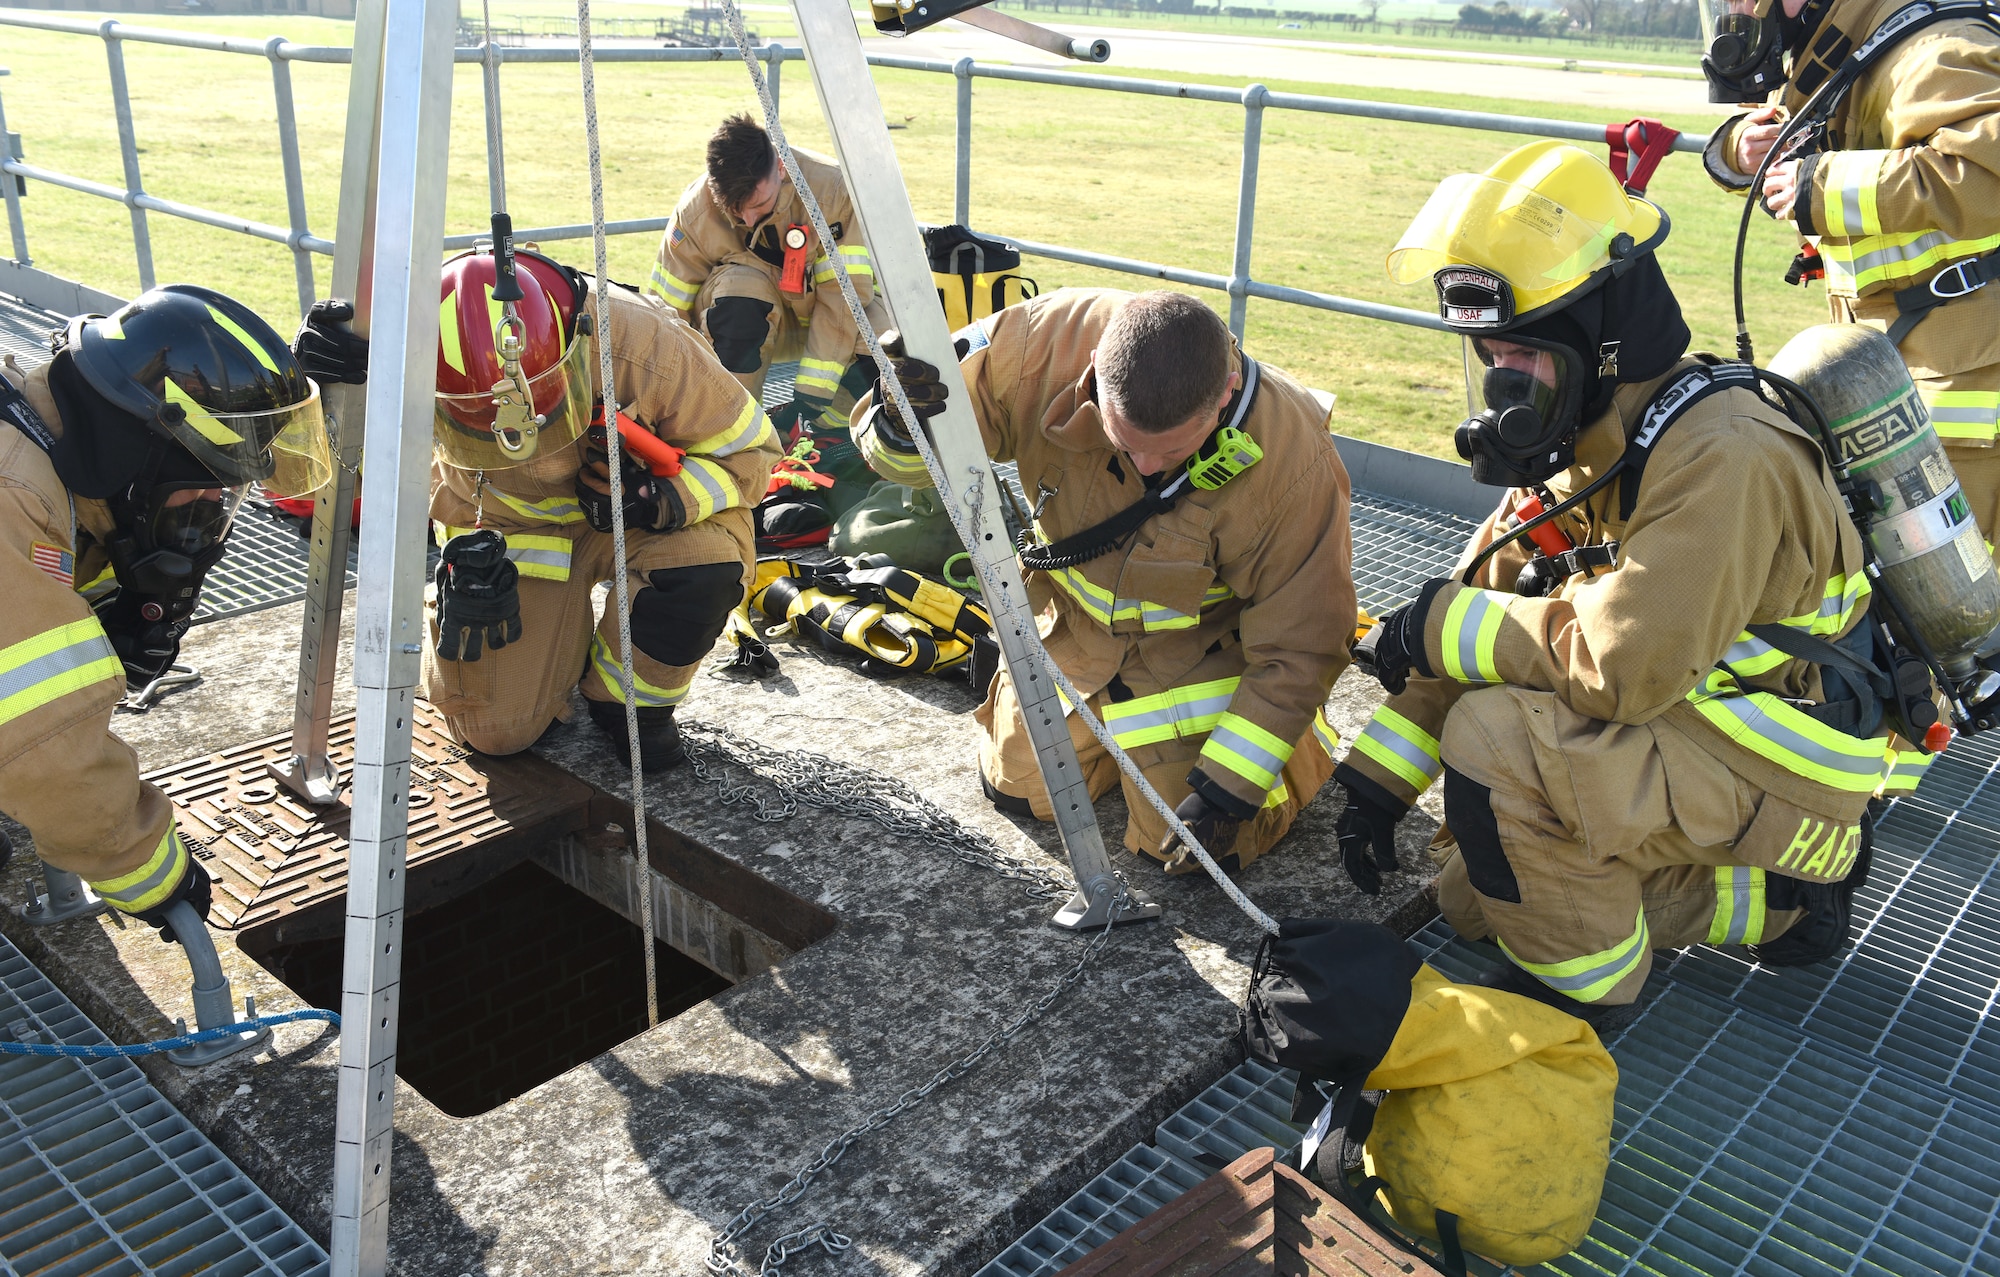 U.S. Air Force and British civilian firefighters, assigned to the 100th Civil Engineer Squadron Fire Department, carry out confined space training at the purpose-built facility at Royal Air Force Mildenhall, England, April 14, 2022.  This type of training is vital to the first responders to provide them with the necessary skills to extricate wounded or trapped personnel, including high-angle litter and stretcher evacuation. (U.S. Air Force photo by Karen Abeyasekere)